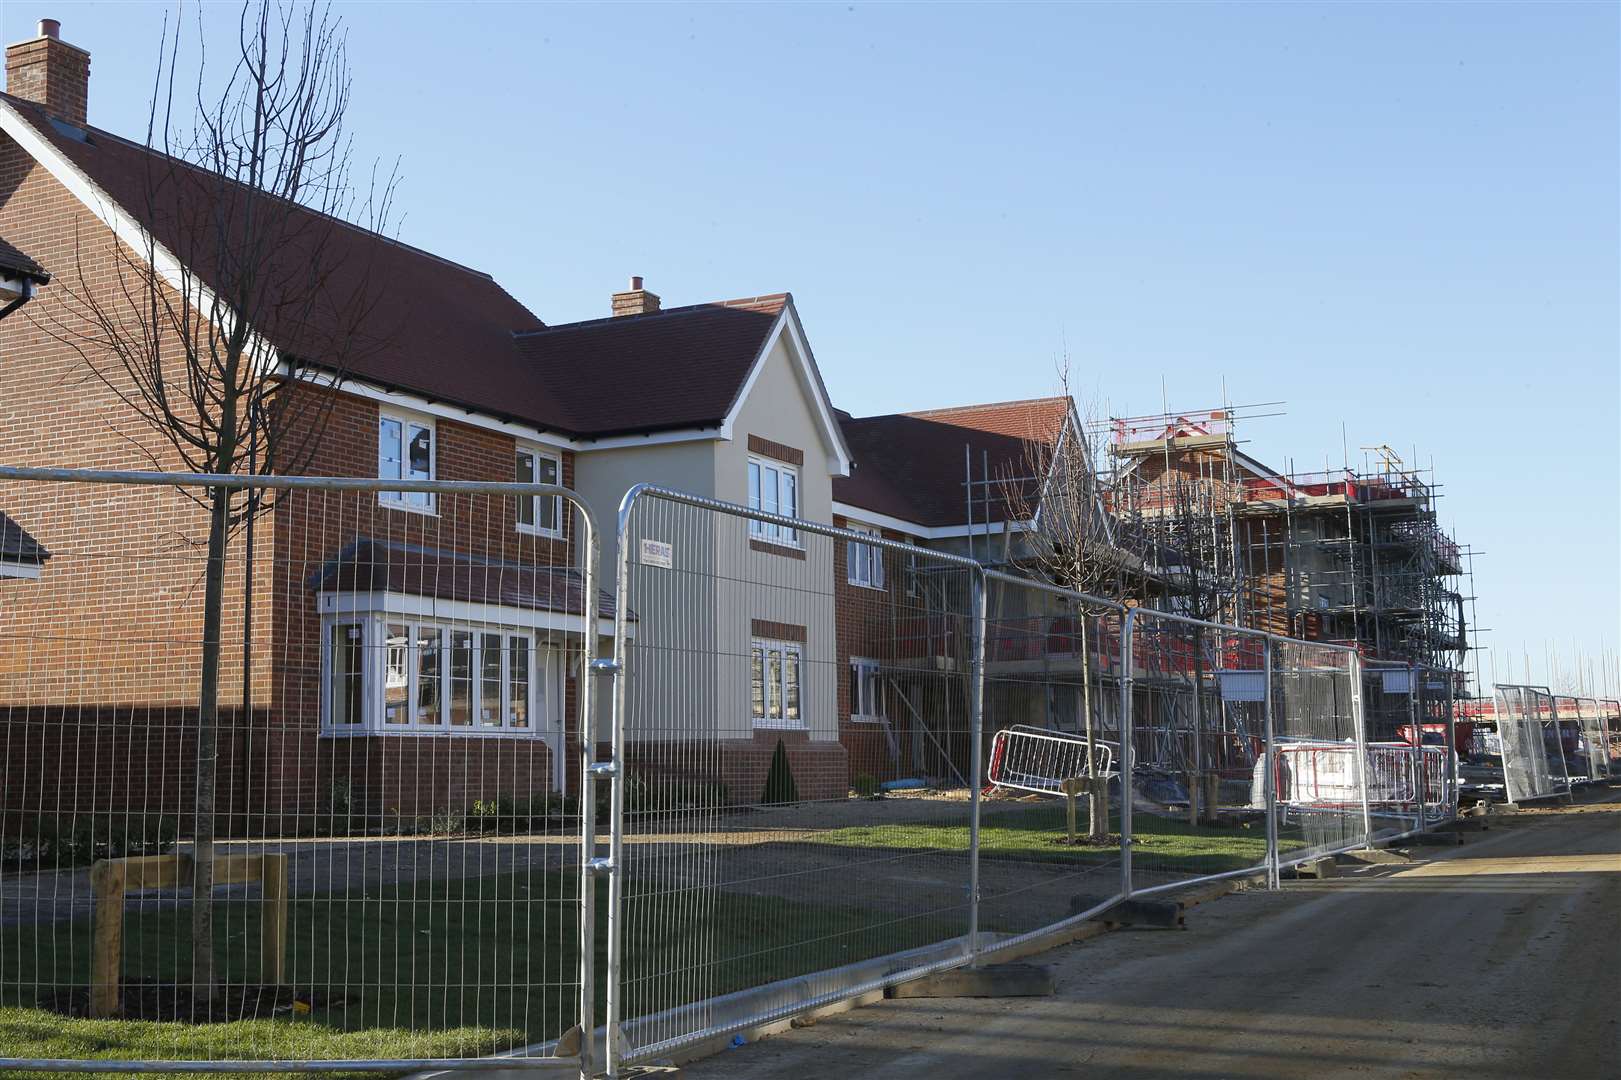 Bovis Homes development at Orchard Fields off Hermitage Lane in Maidstone